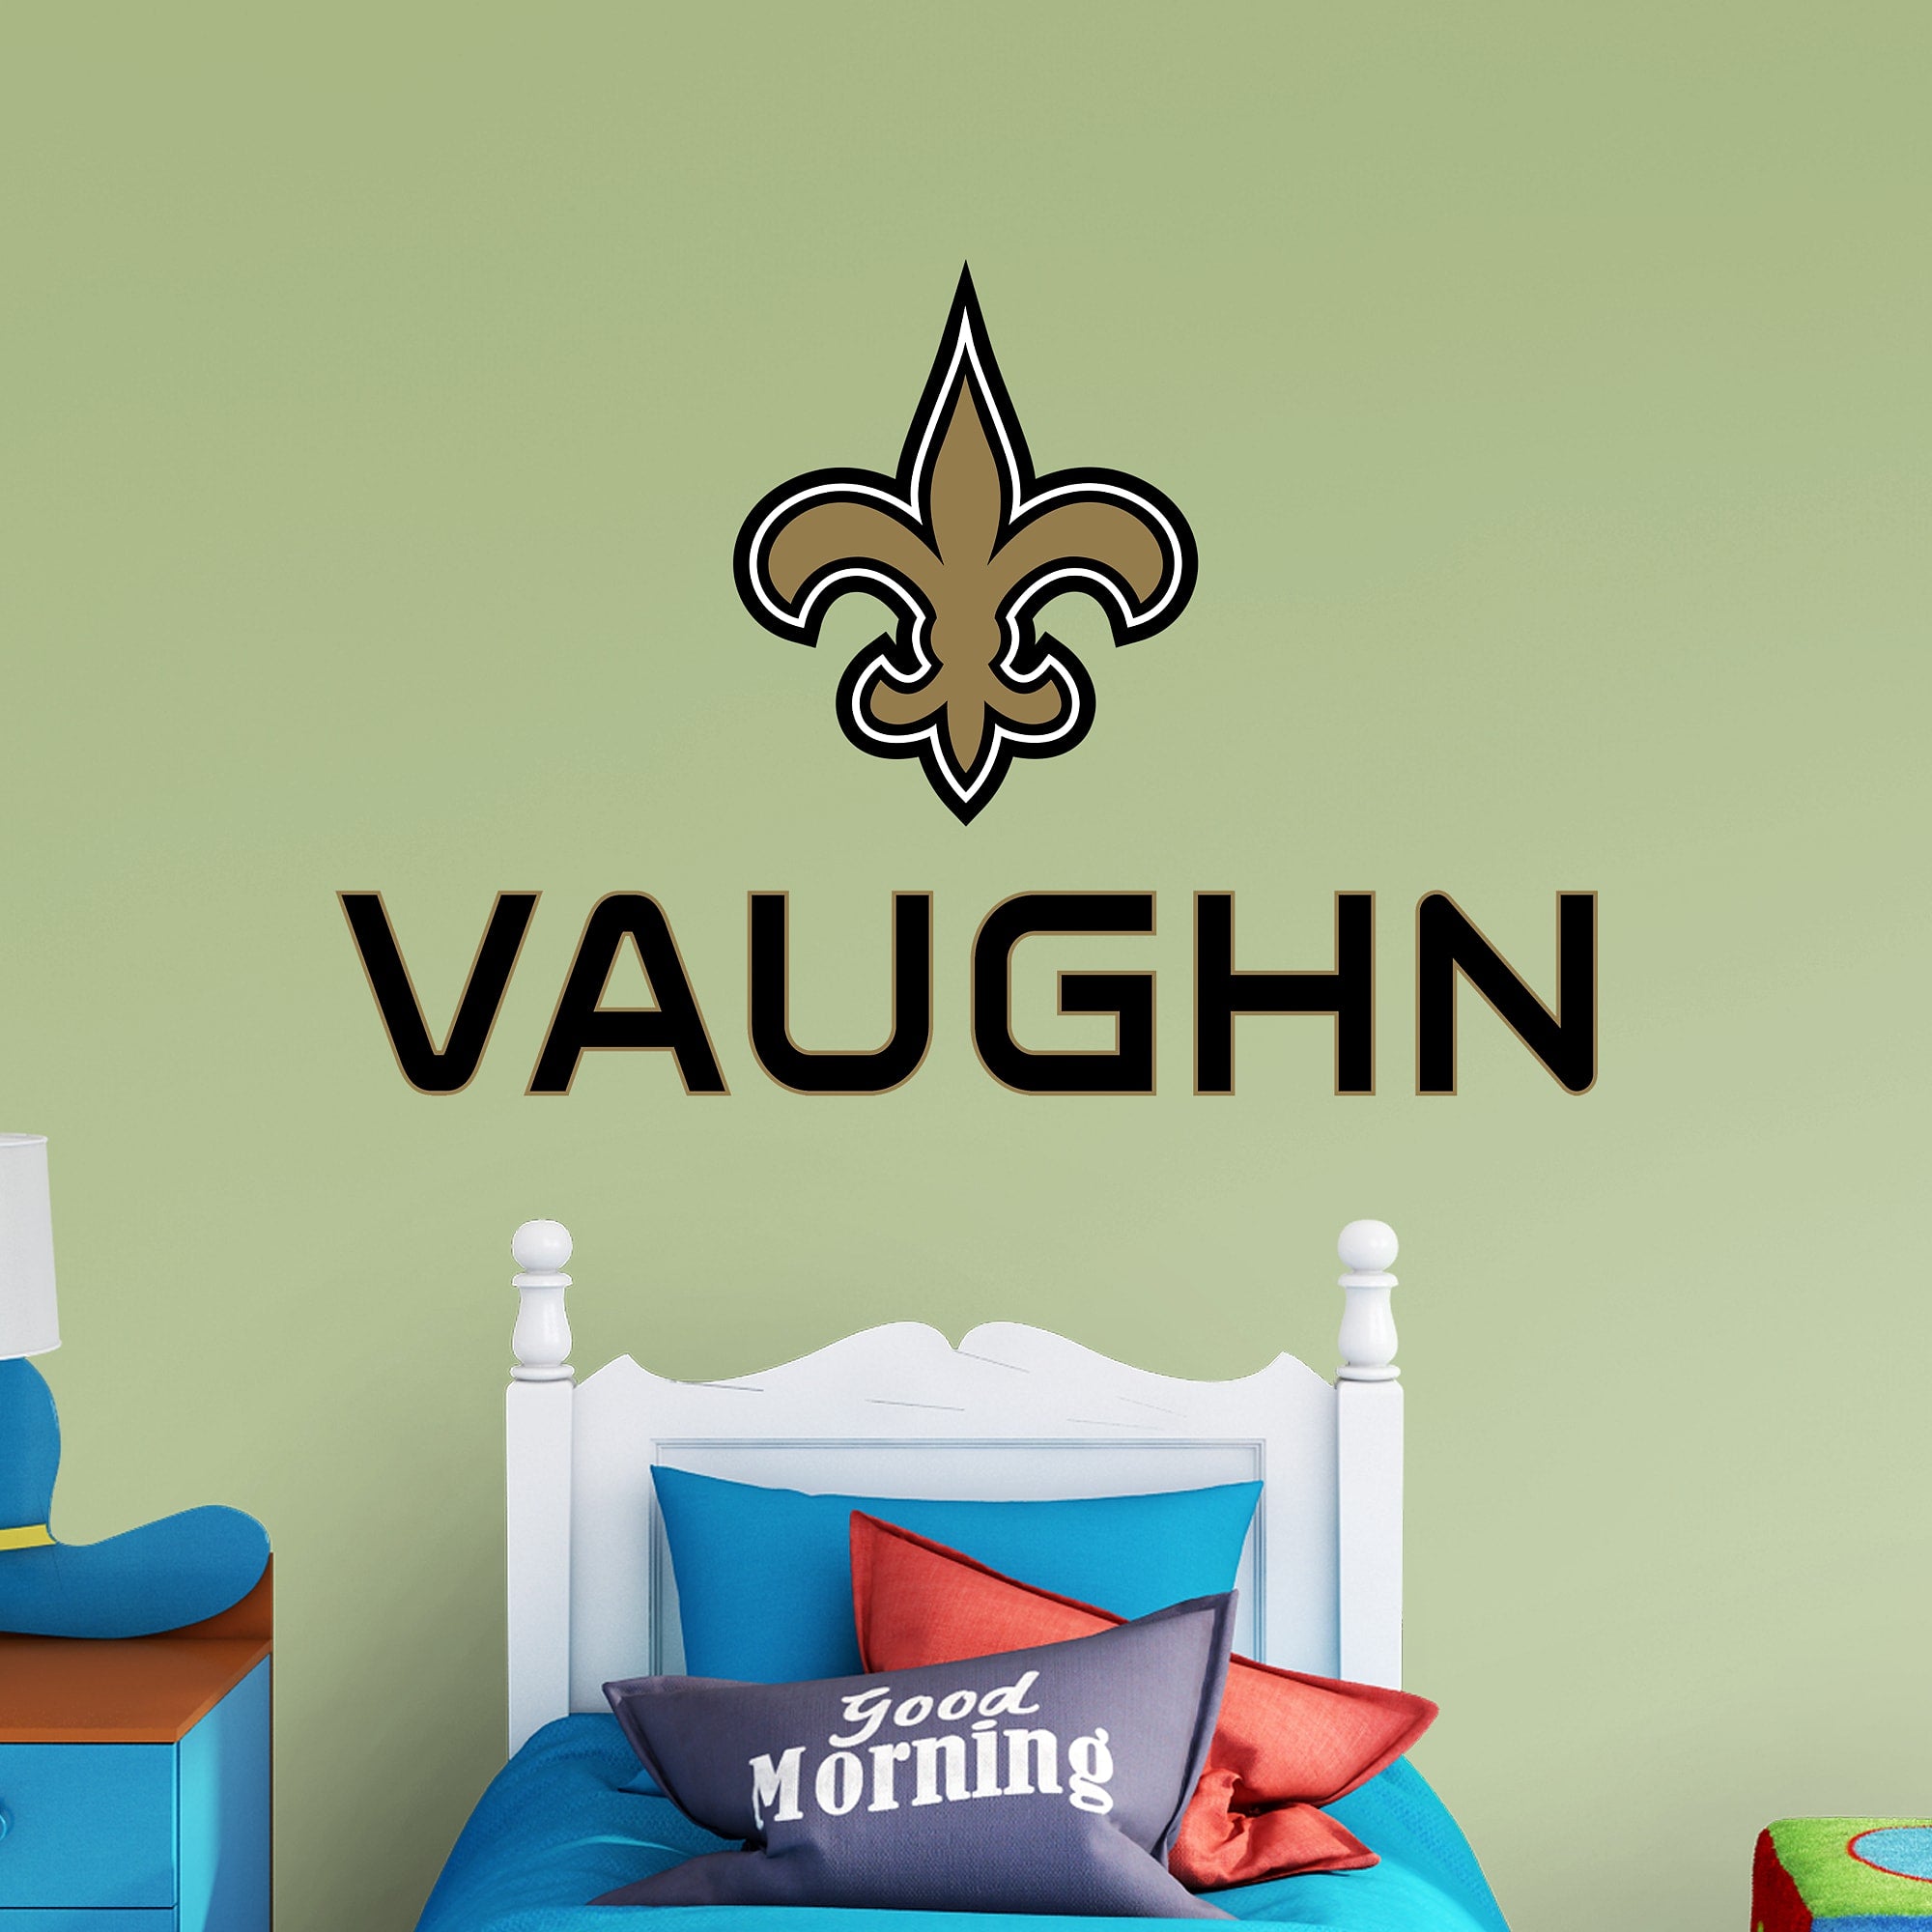 New Orleans Saints: Stacked Personalized Name - Officially Licensed NFL Transfer Decal in Black (52"W x 39.5"H) by Fathead | Vin